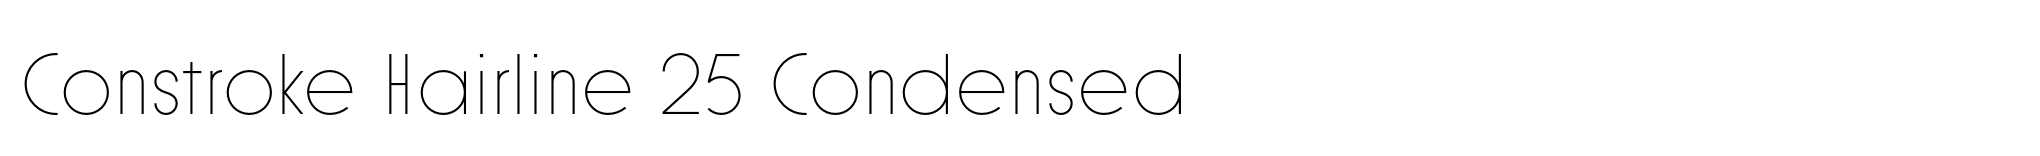 Constroke Hairline 25 Condensed image